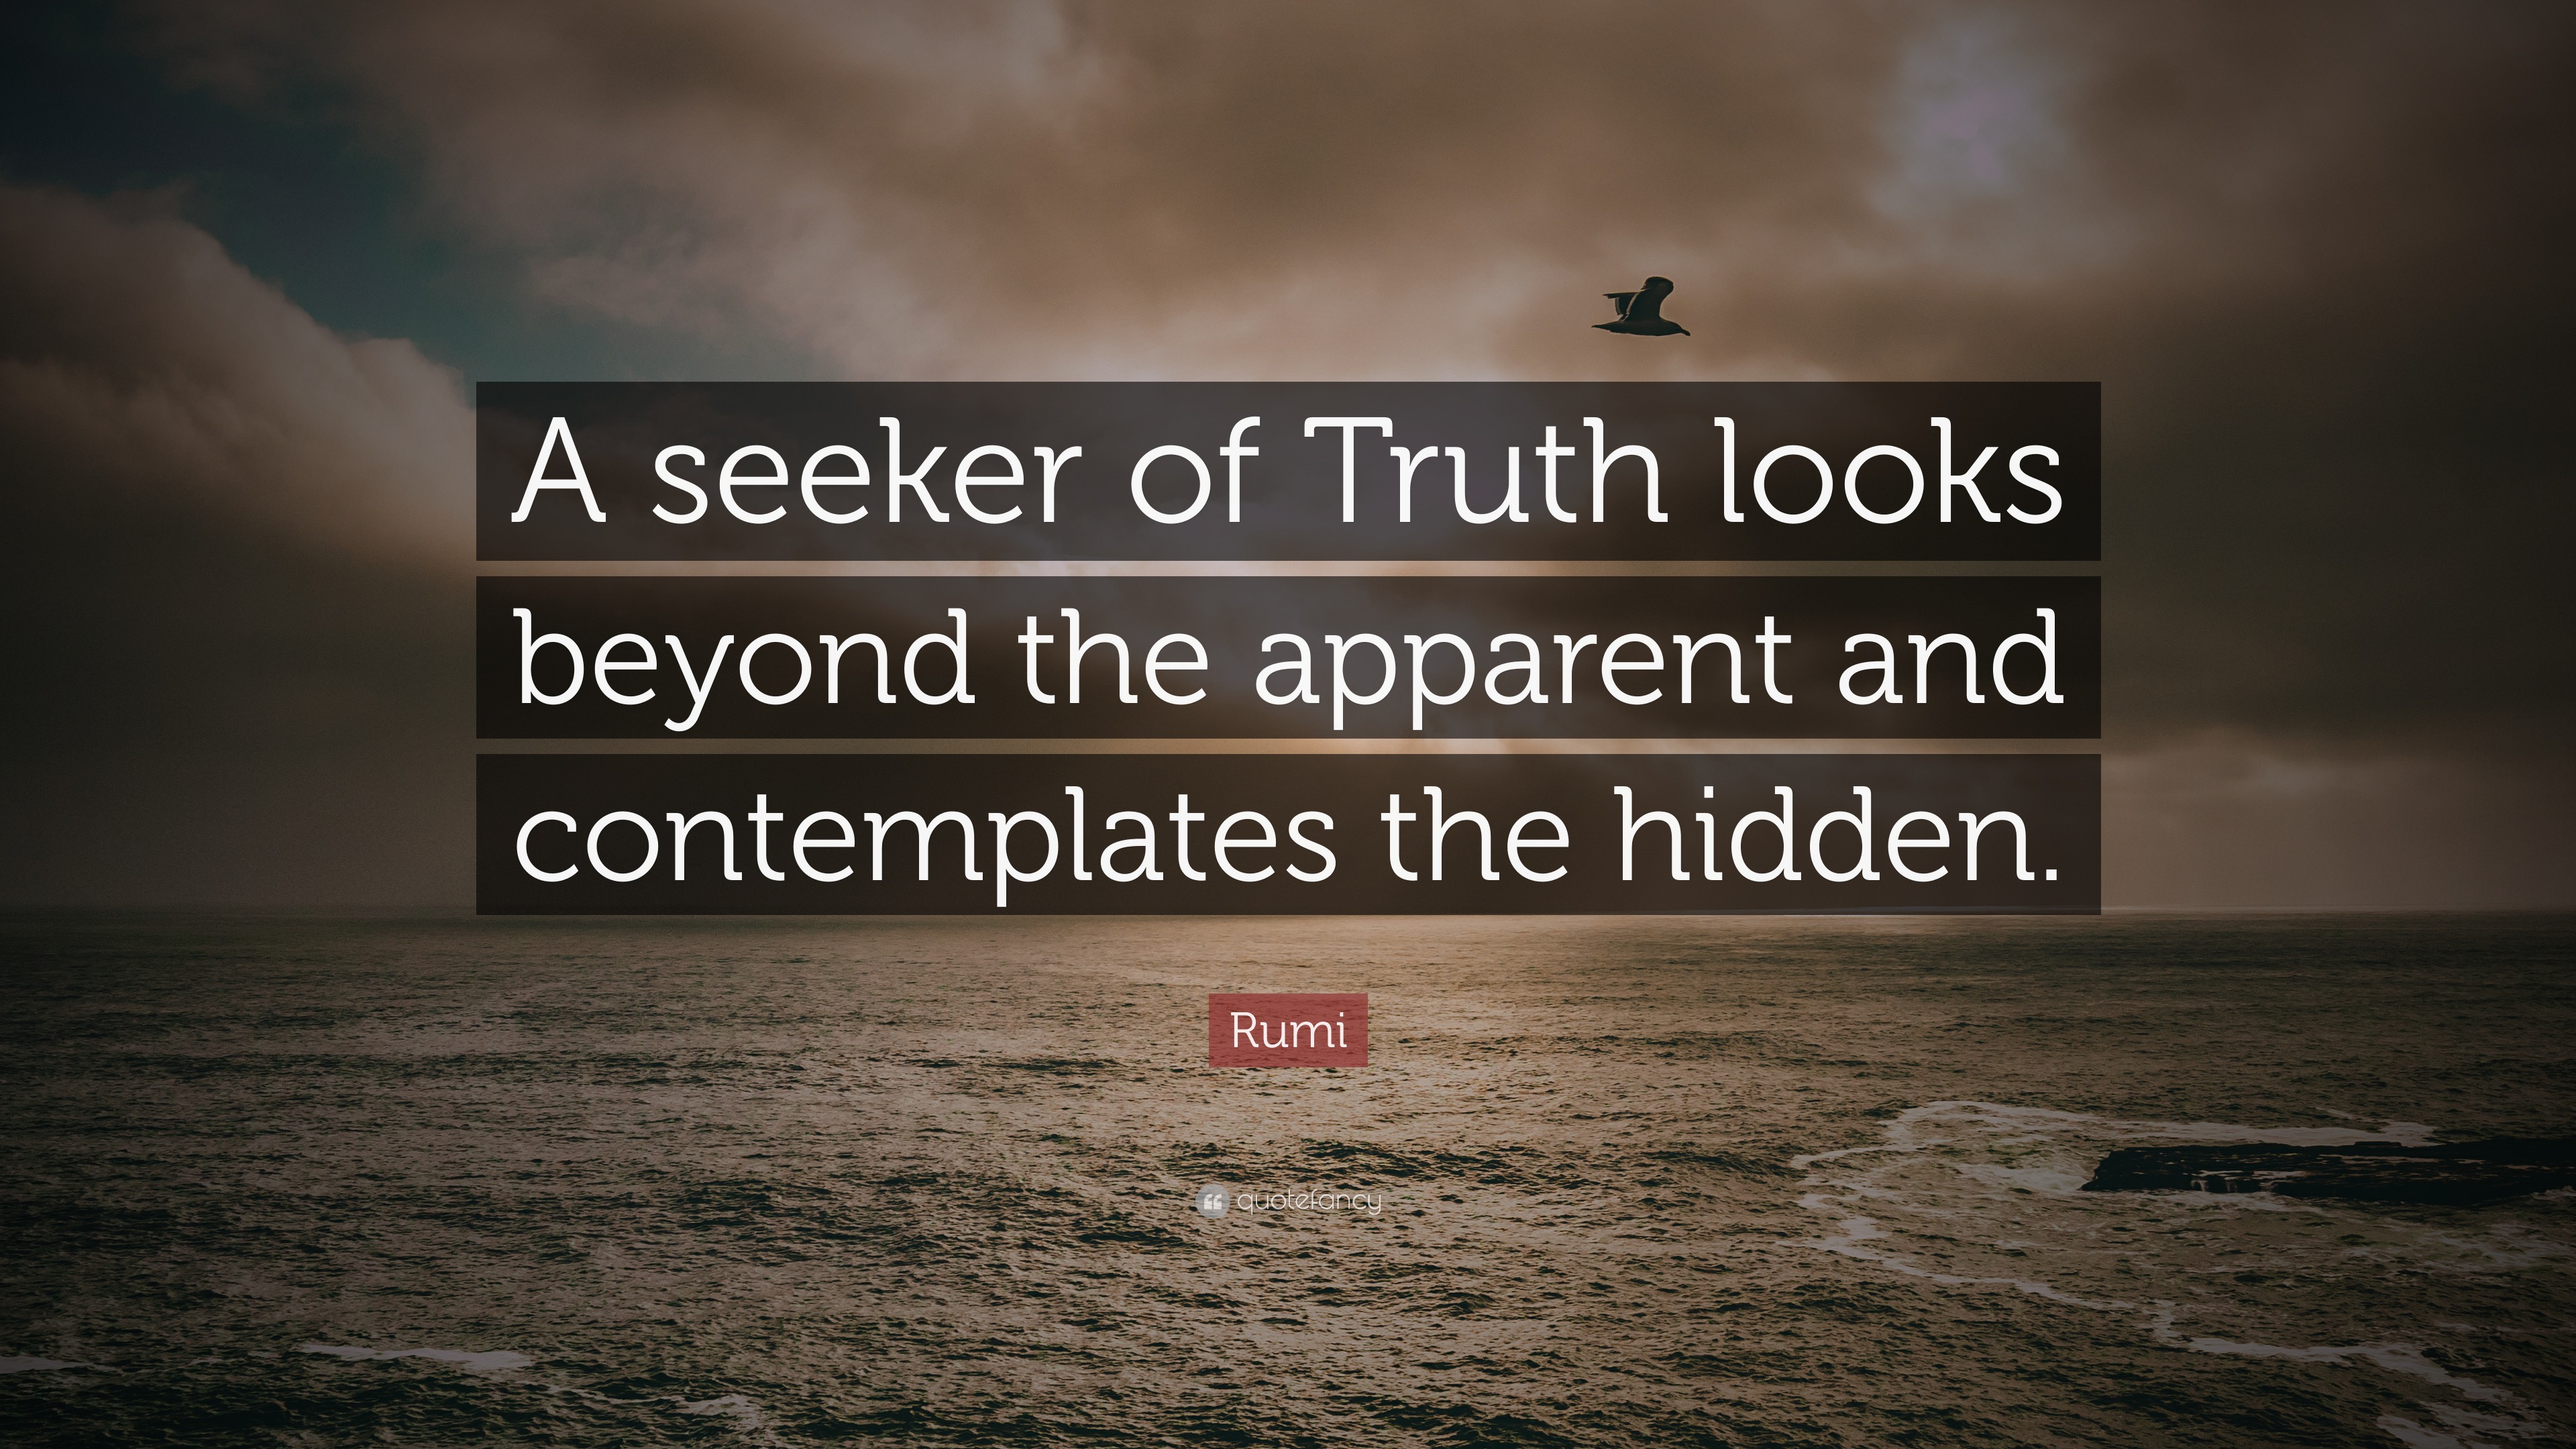 Rumi Quote “A seeker of Truth looks beyond the apparent and contemplates the hidden